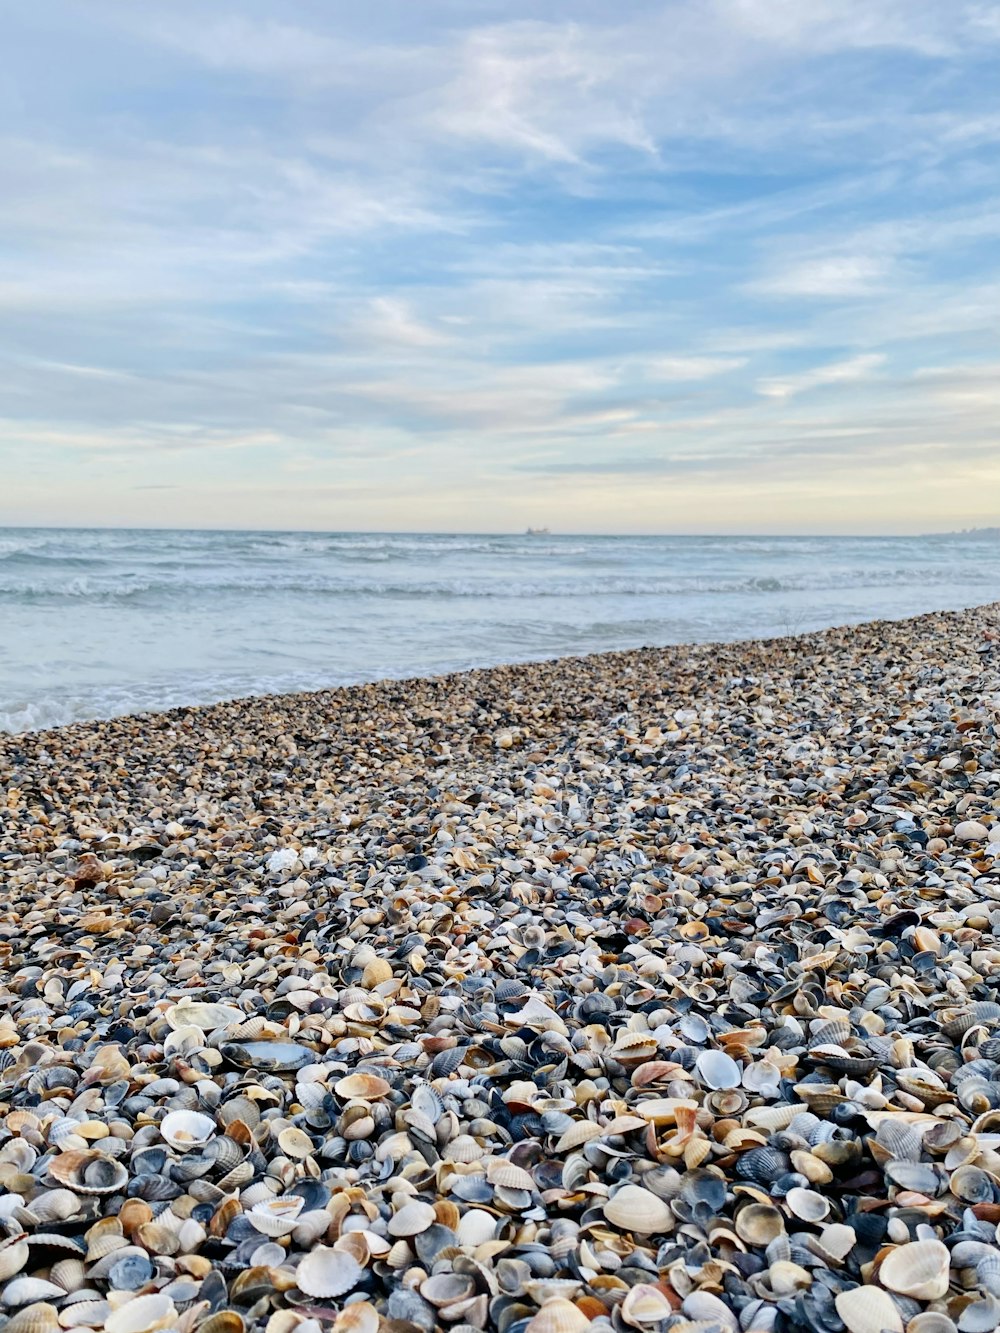 gray and white pebbles on seashore during daytime